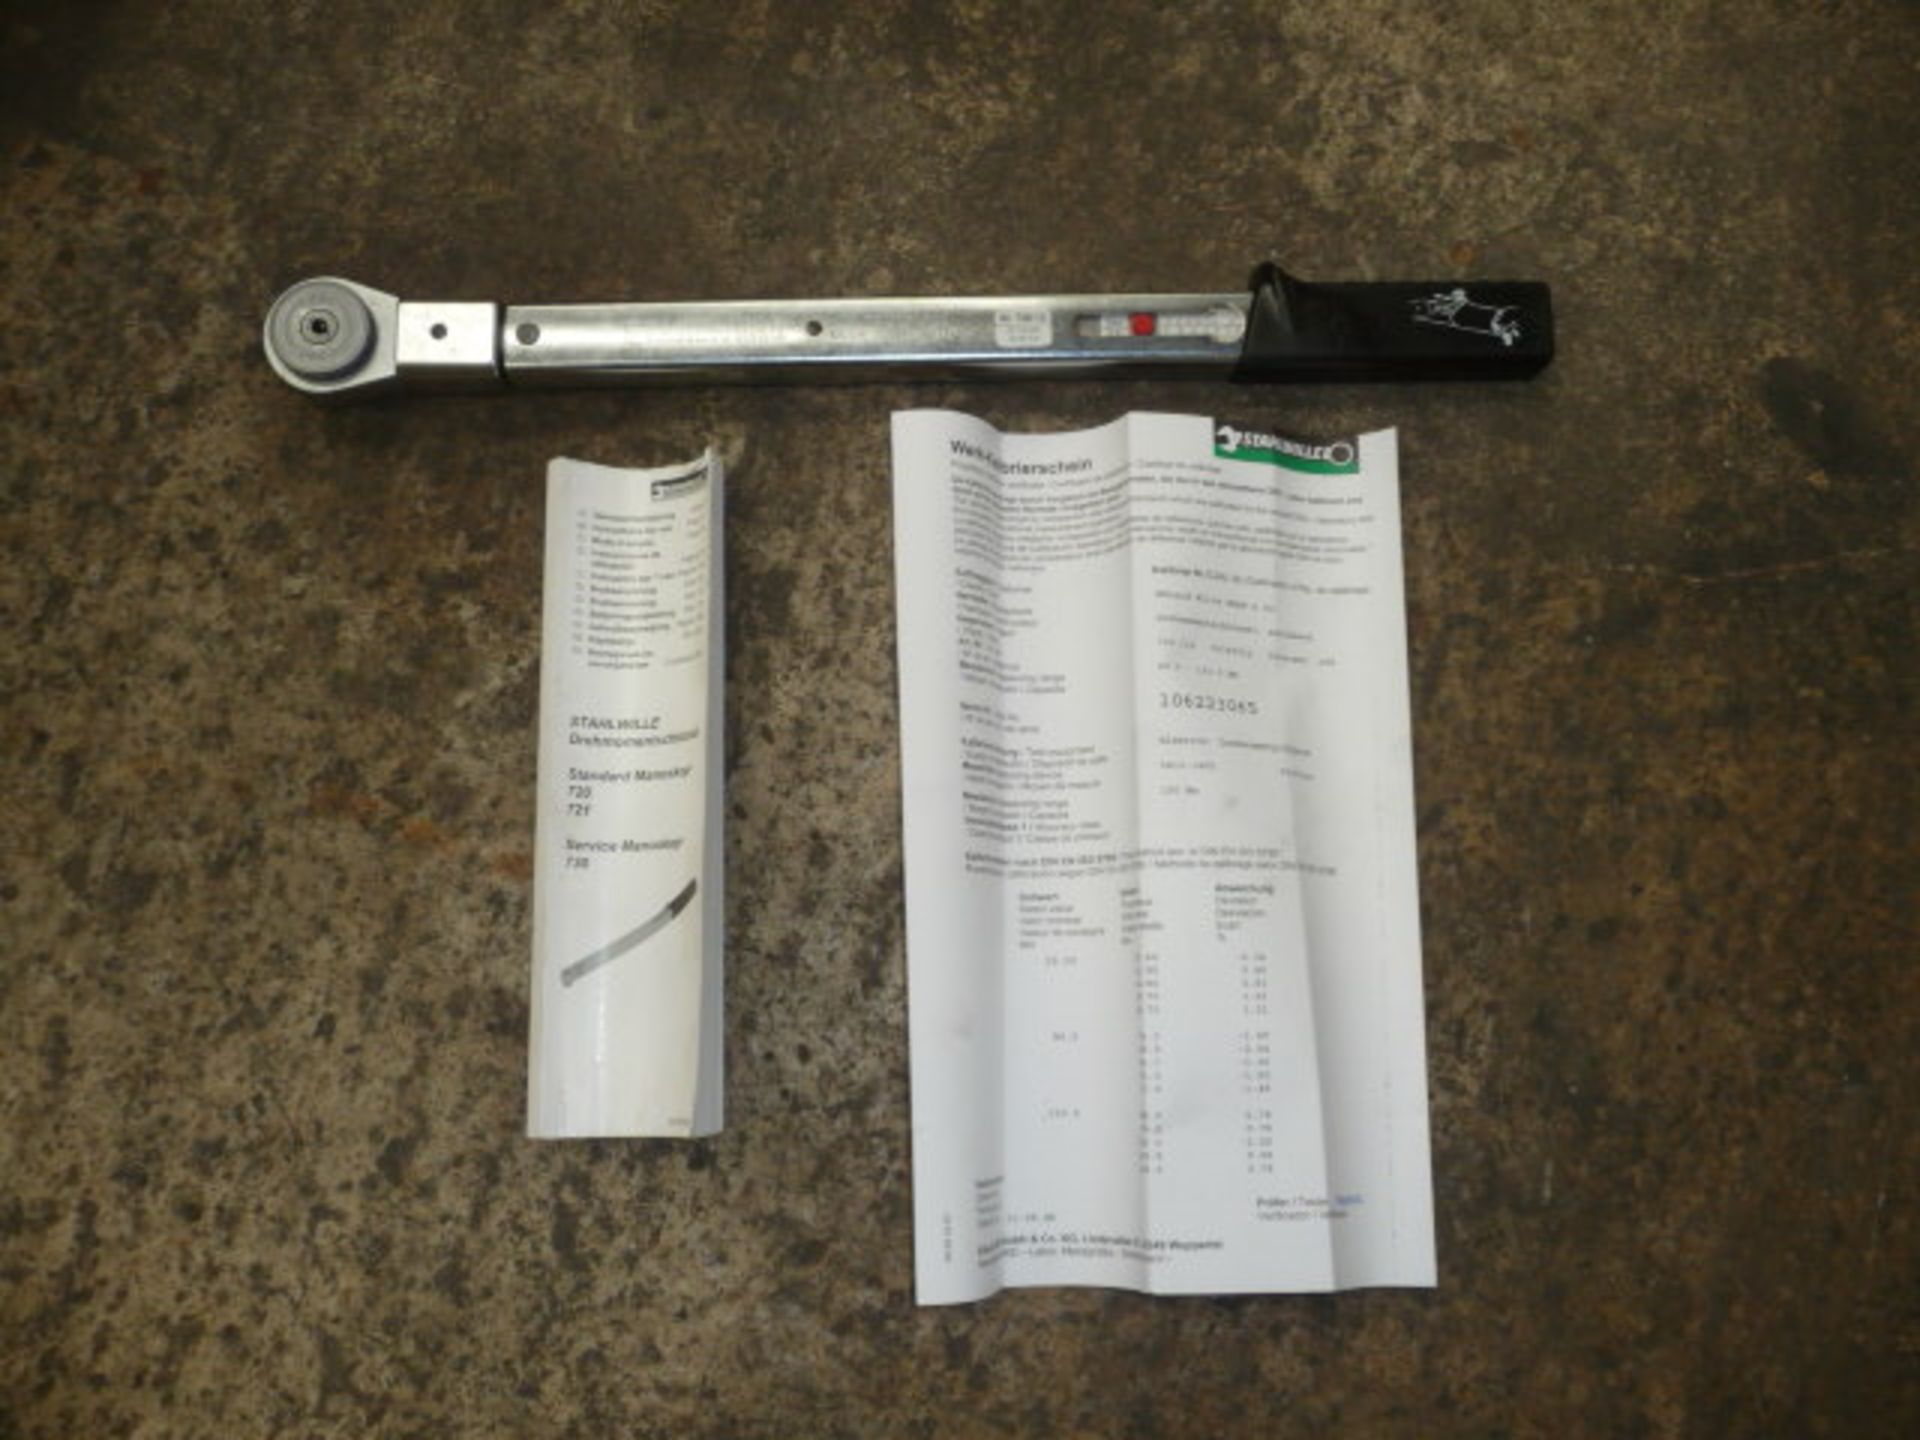 Mercedes-Benz Type Stahlwille Torque Wrench 730R/12 - Image 2 of 8